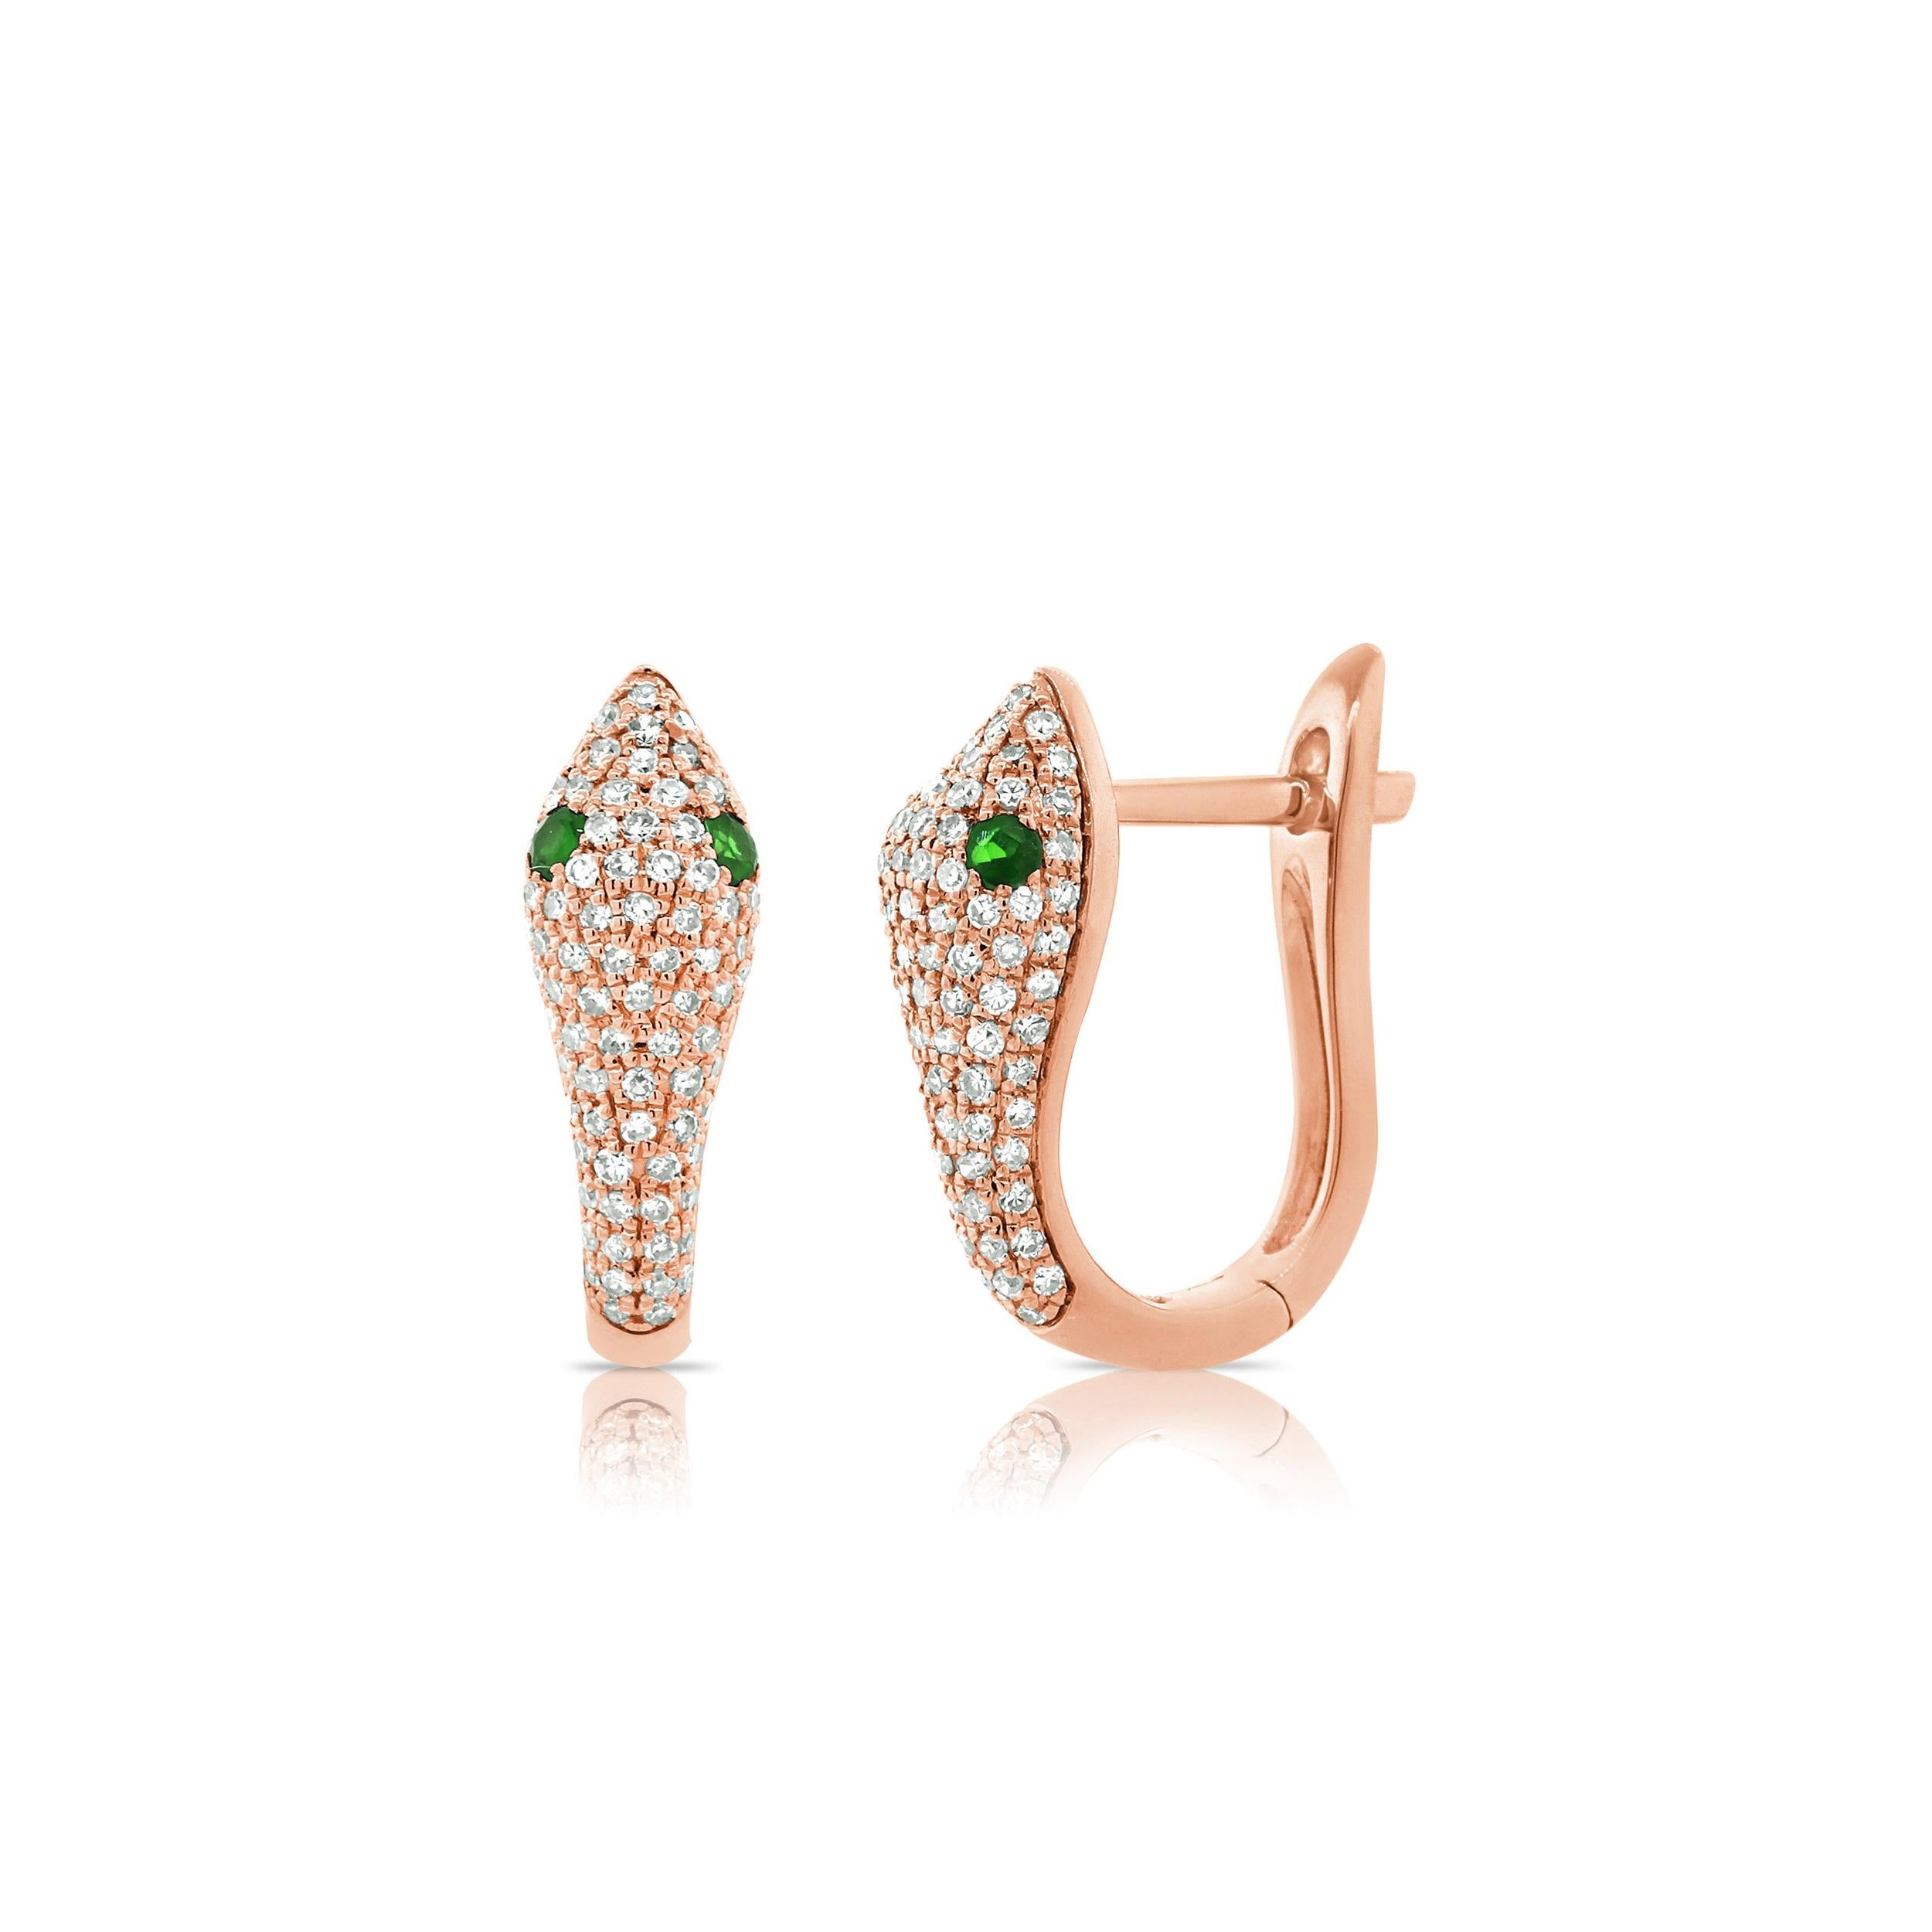 These Stylish and Chic Snake Earrings are crafted of 14K Gold featuring approximately 0.46 cts of round Diamonds & 2 Tsavorite weighing 0.14cts Secured with Hinged backs.
-14K Gold
-0.46cts Natural White Diamonds
-0.14cts Tsavorite
-Diamond Color